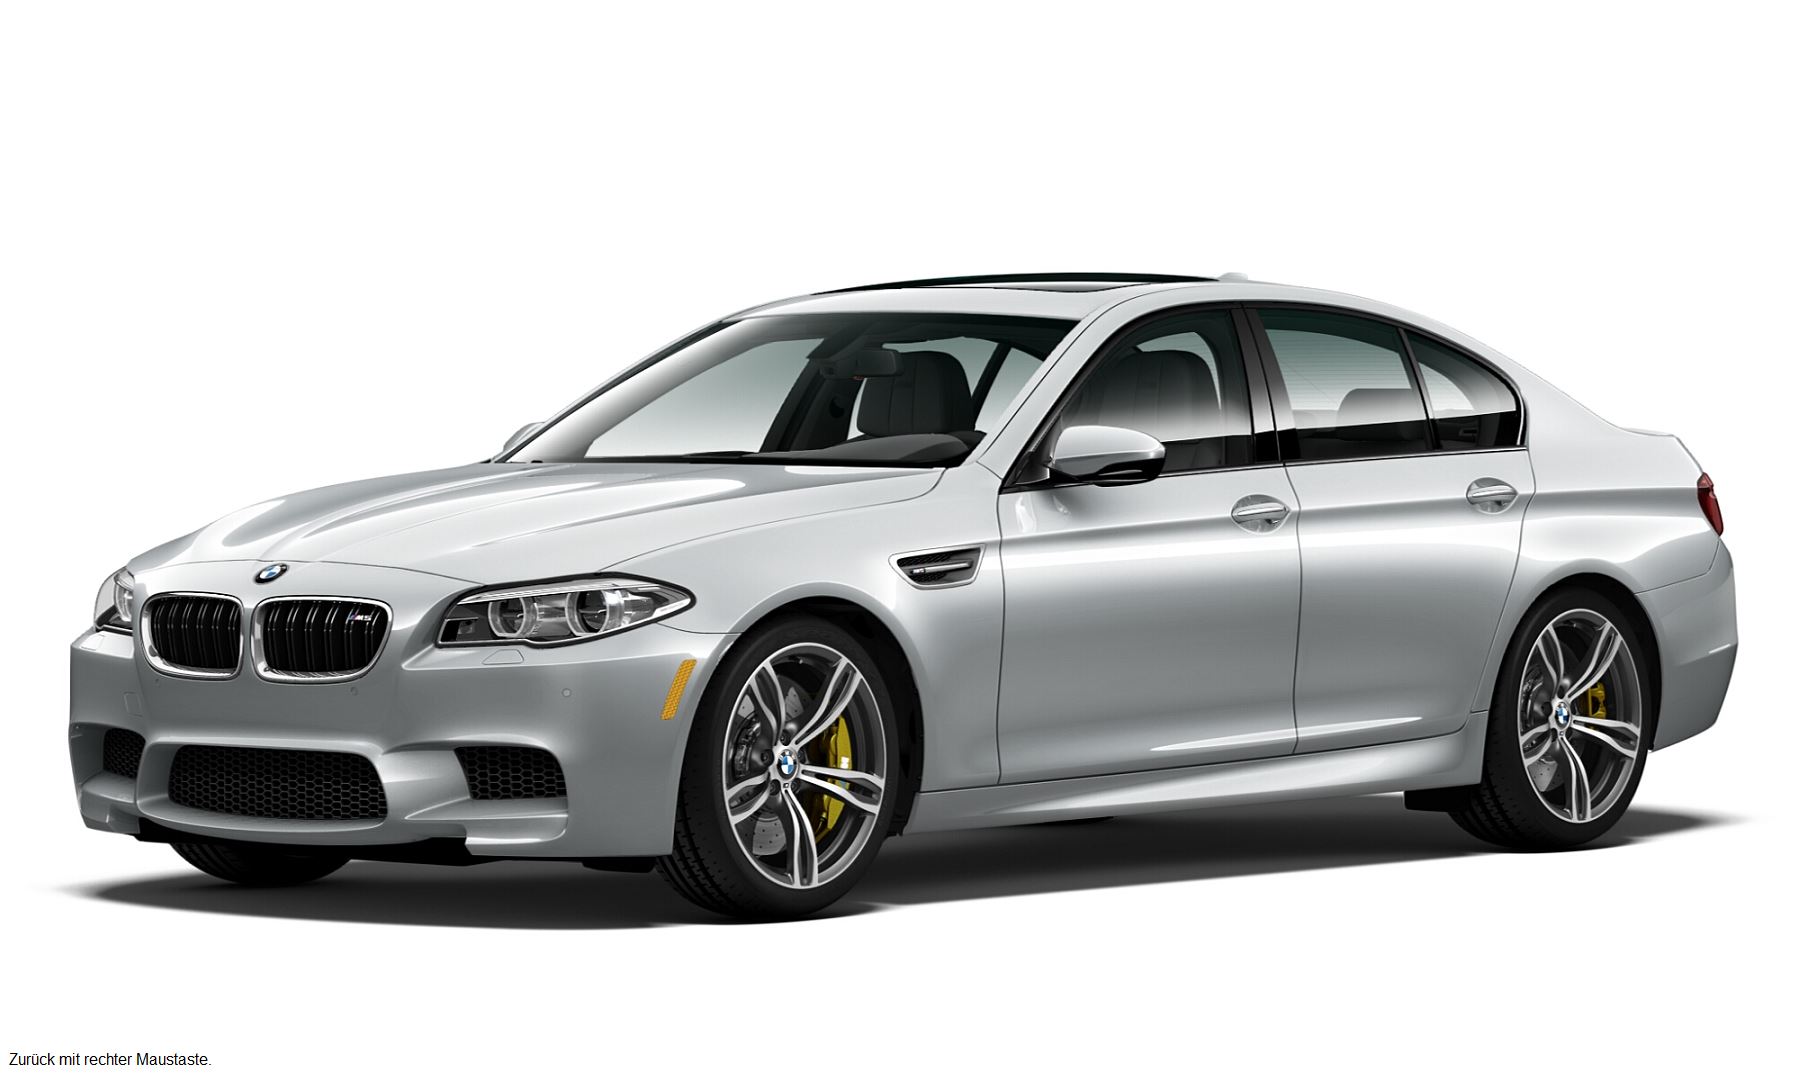 U.S. Special: 2016 BMW M5 Pure Metal Silver Limited Edition ...